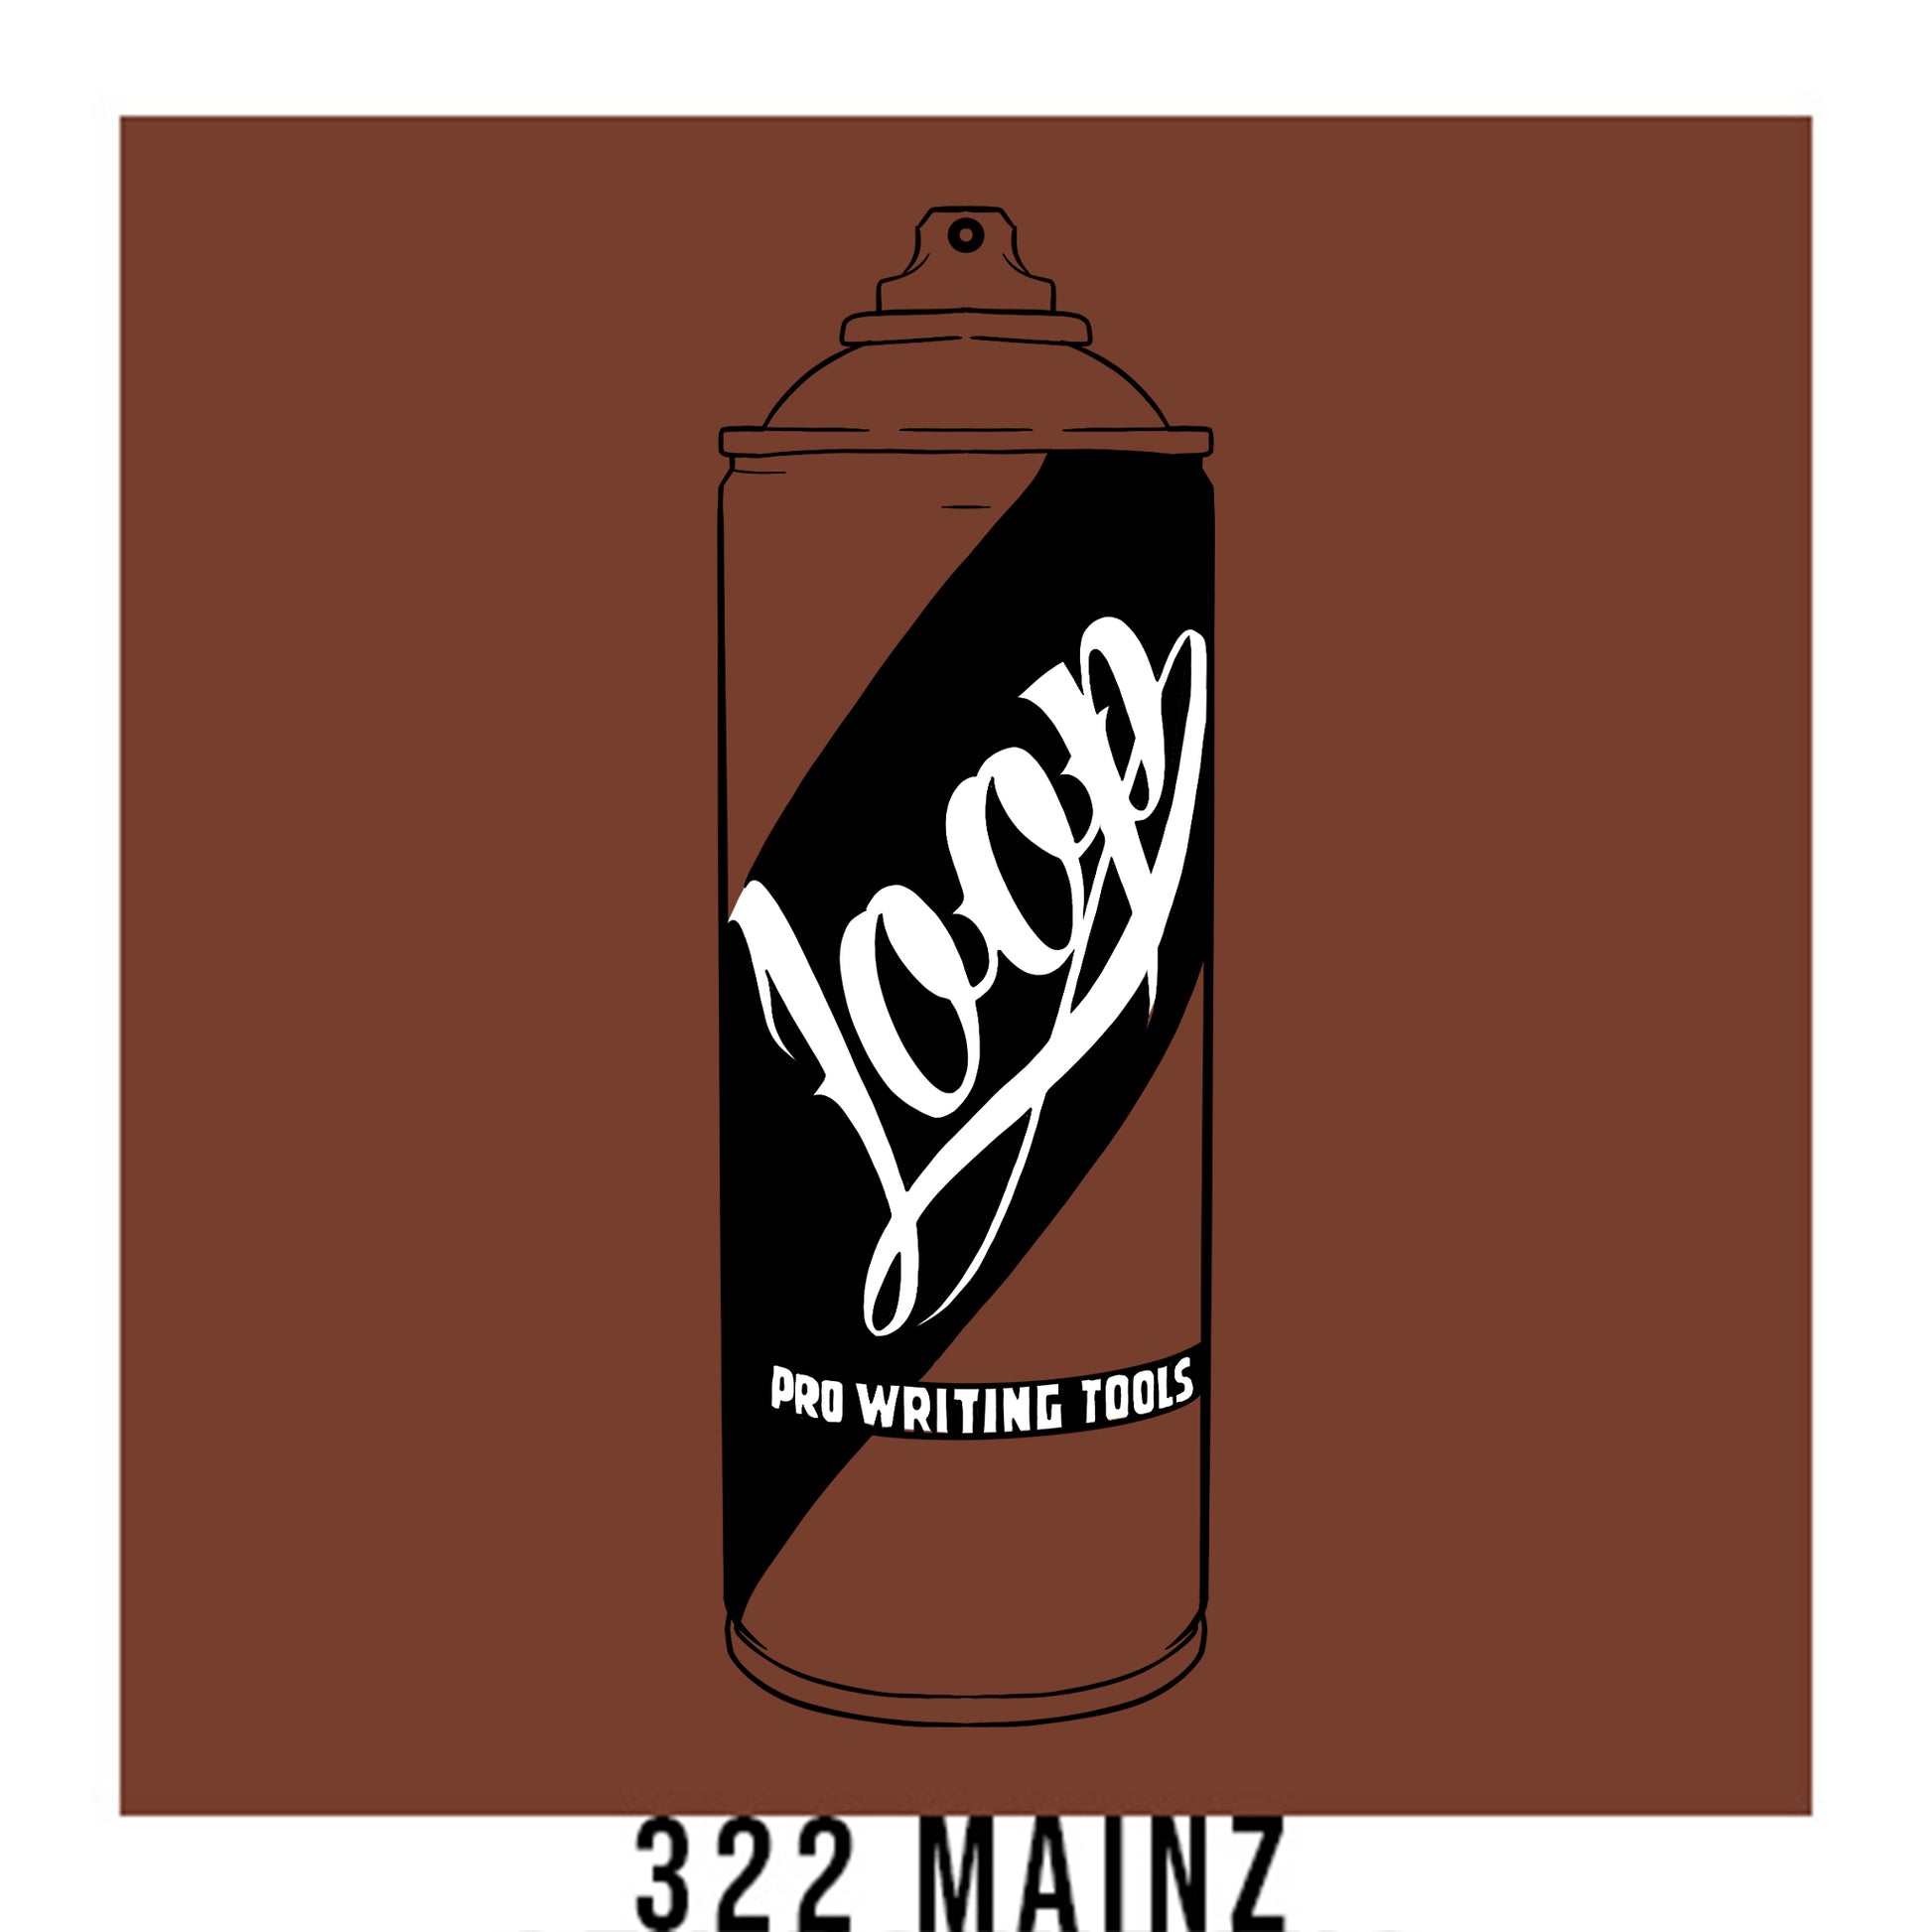 A black outline drawing of a Chestnut spray paint can with the word "Loop" written on the face in script. The background is a color swatch of the same chestnut with a white border with the words "322 Mainz" at the bottom.